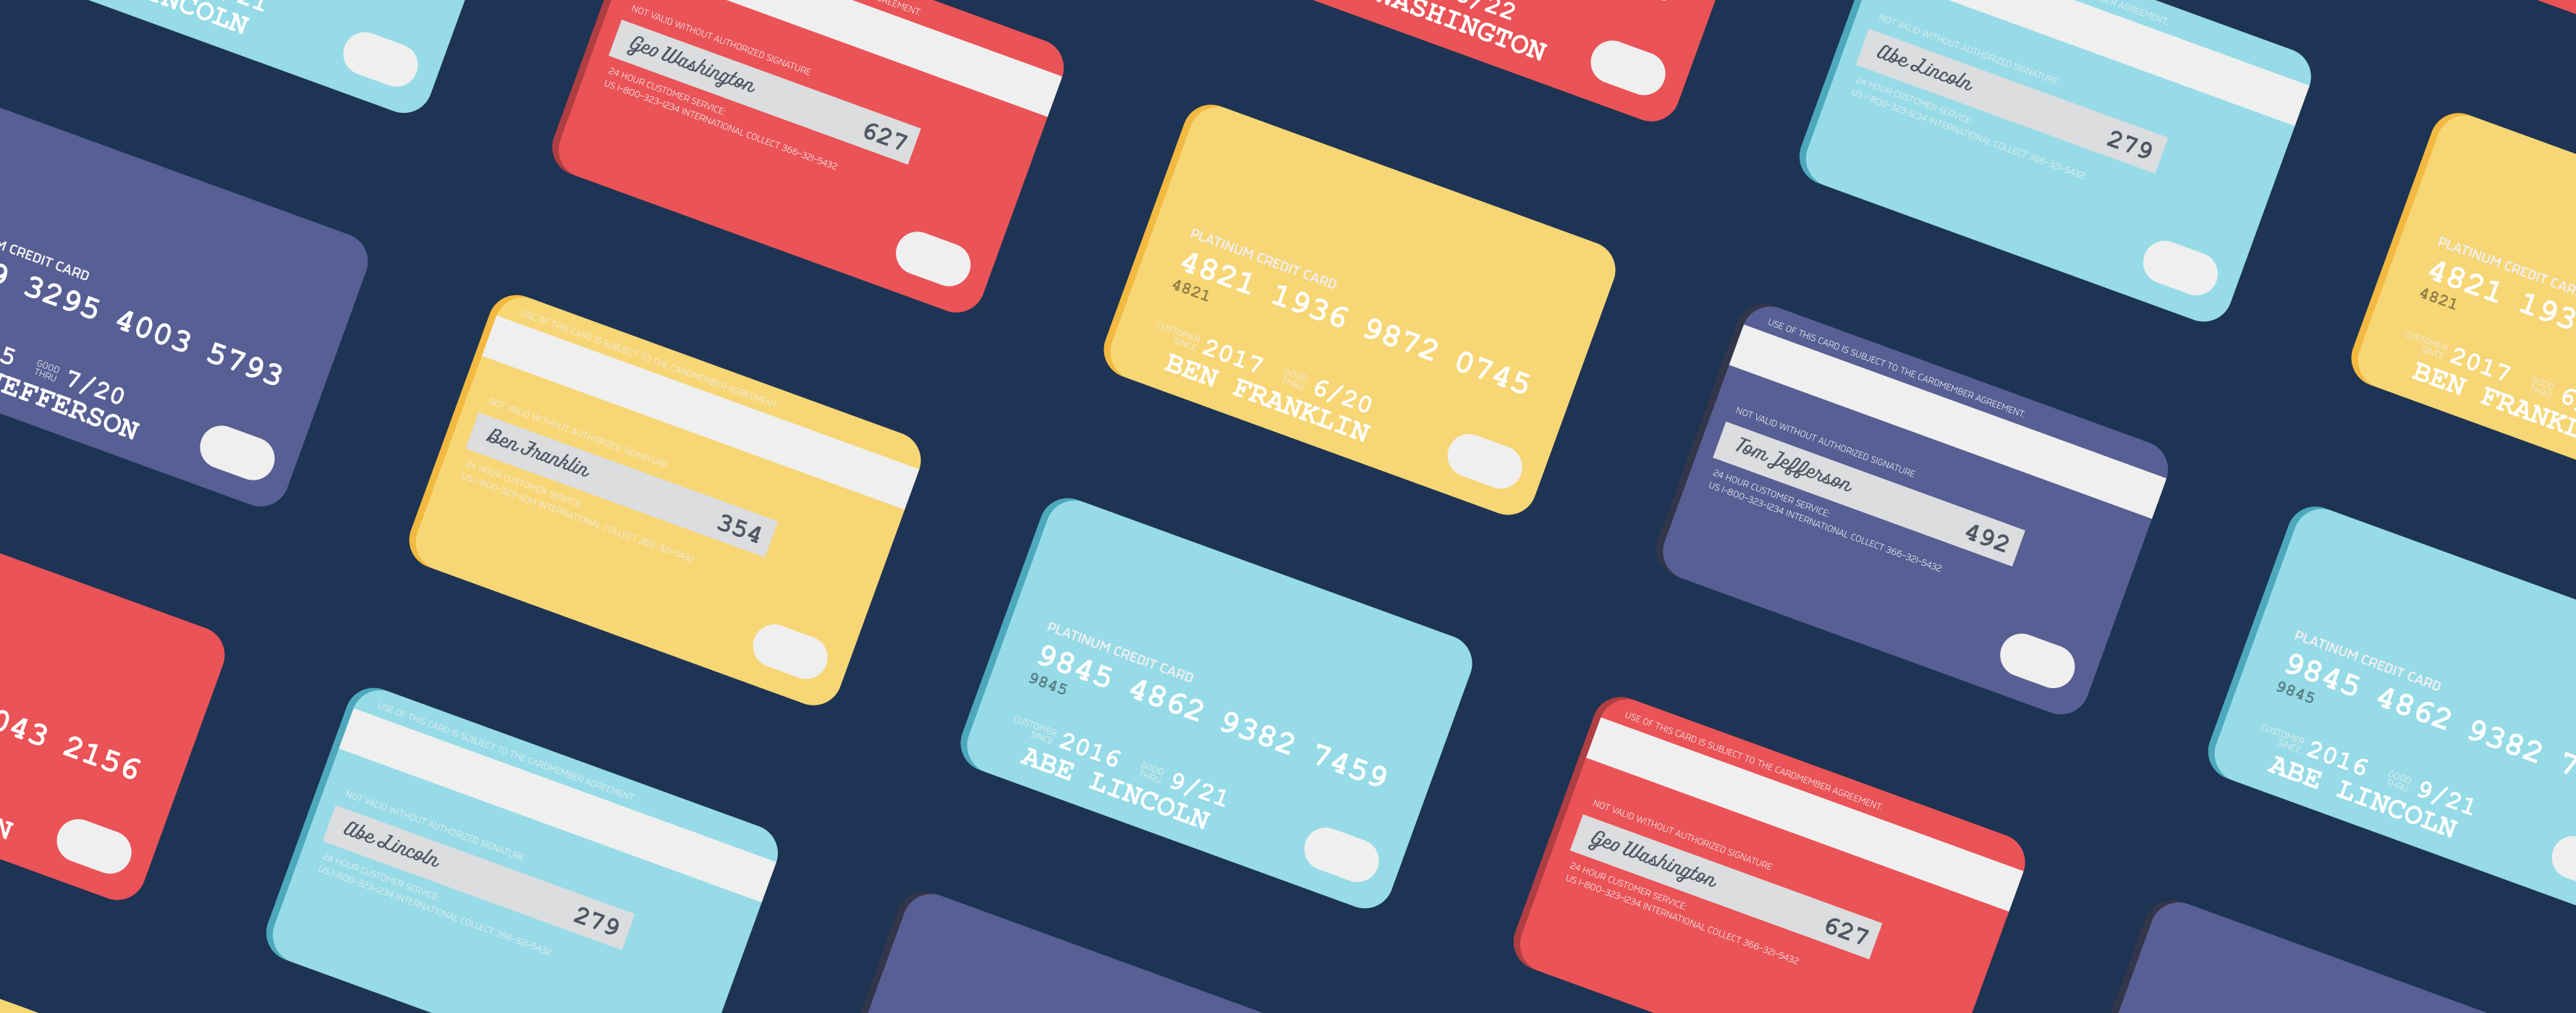 stylized graphic with credit card imagery